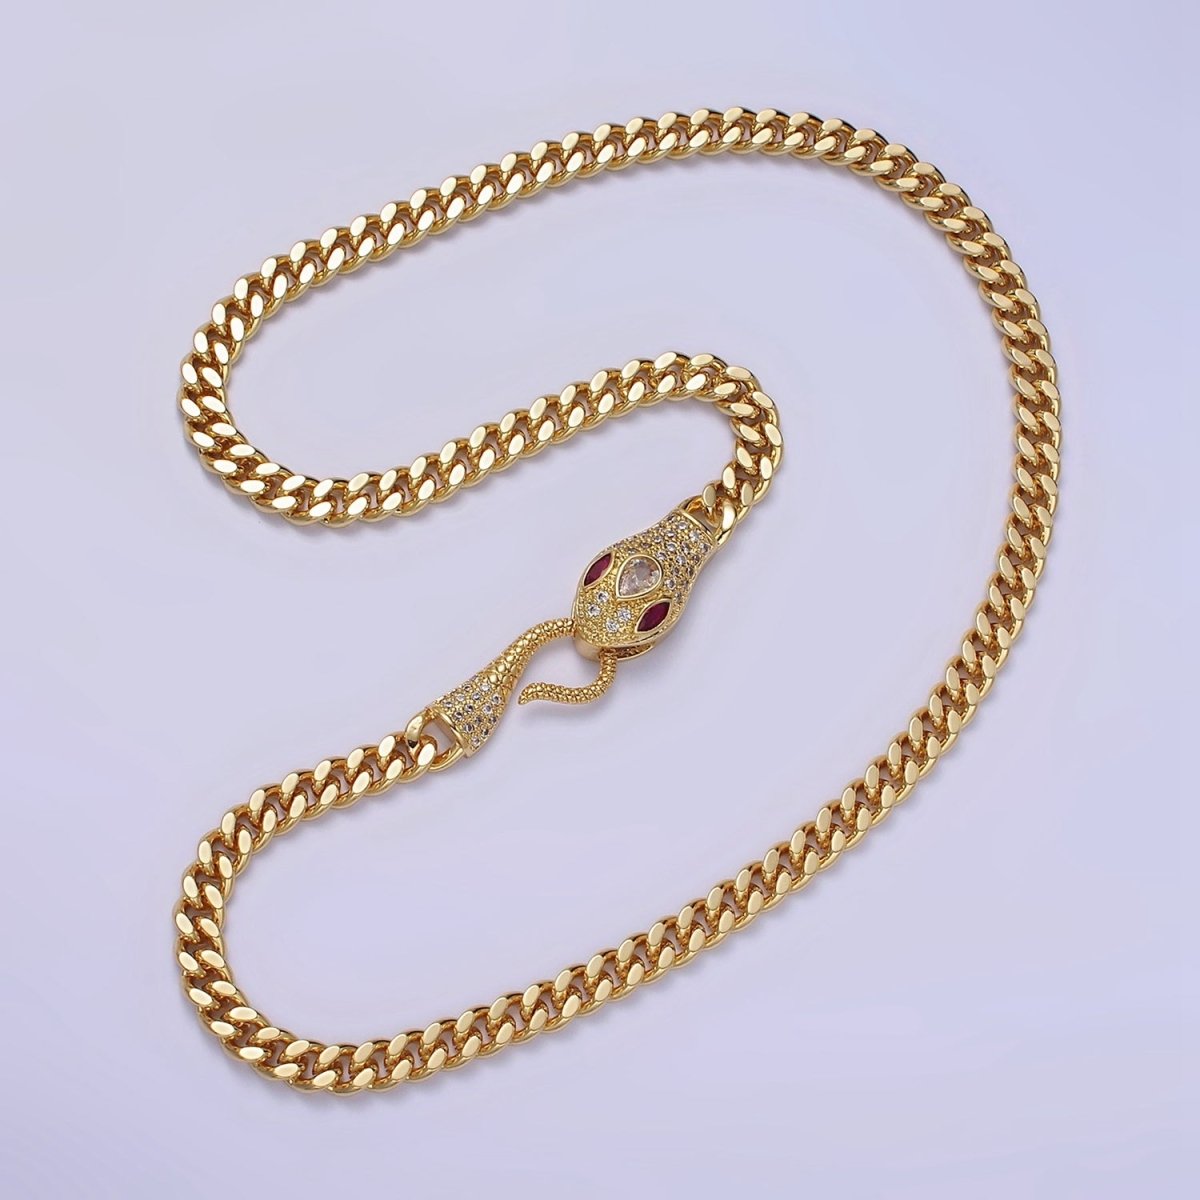 14K Gold Filled Fuchsia, Green Eyed Snake Textured Bite 18 Inch Curb Chain Necklace | WA-2204 - WA-2207 Clearance Pricing - DLUXCA